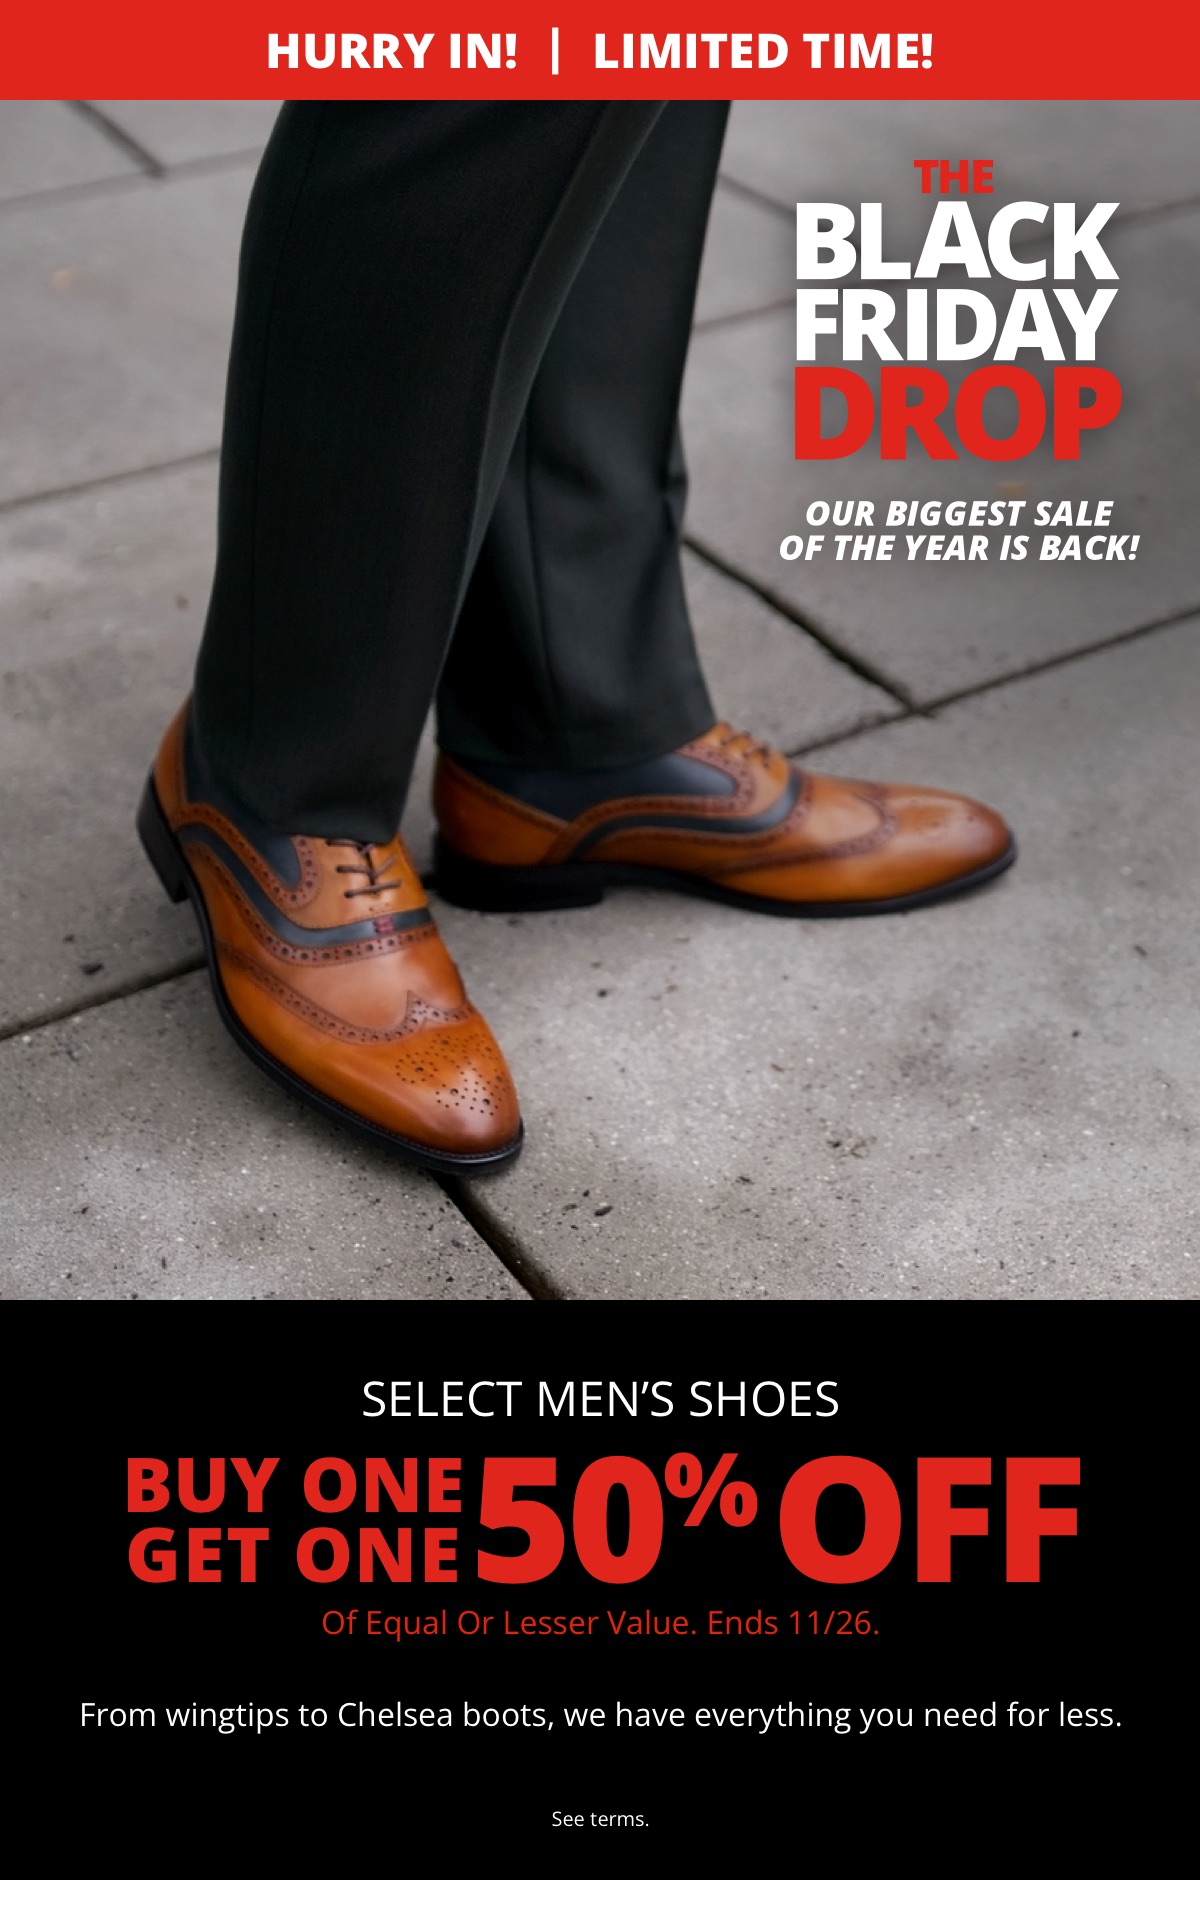 Hurry In! | Limited Time!|The Black Friday Drop|Our biggest sale of the year is back!|Mens Shoes|Buy One Get One 50% Off|Of Equal or Lesser Value. Ends 11/26.|From wingtips to Chelsea boots, we have everything you need for less.|See terms.